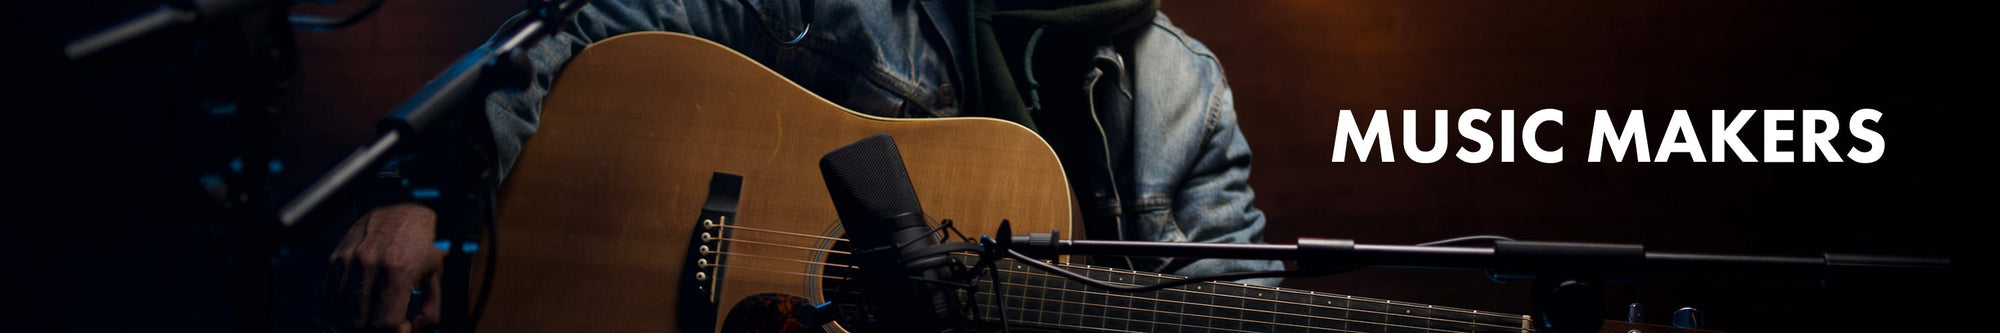 Microphones for Musicians & Instruments - Movo